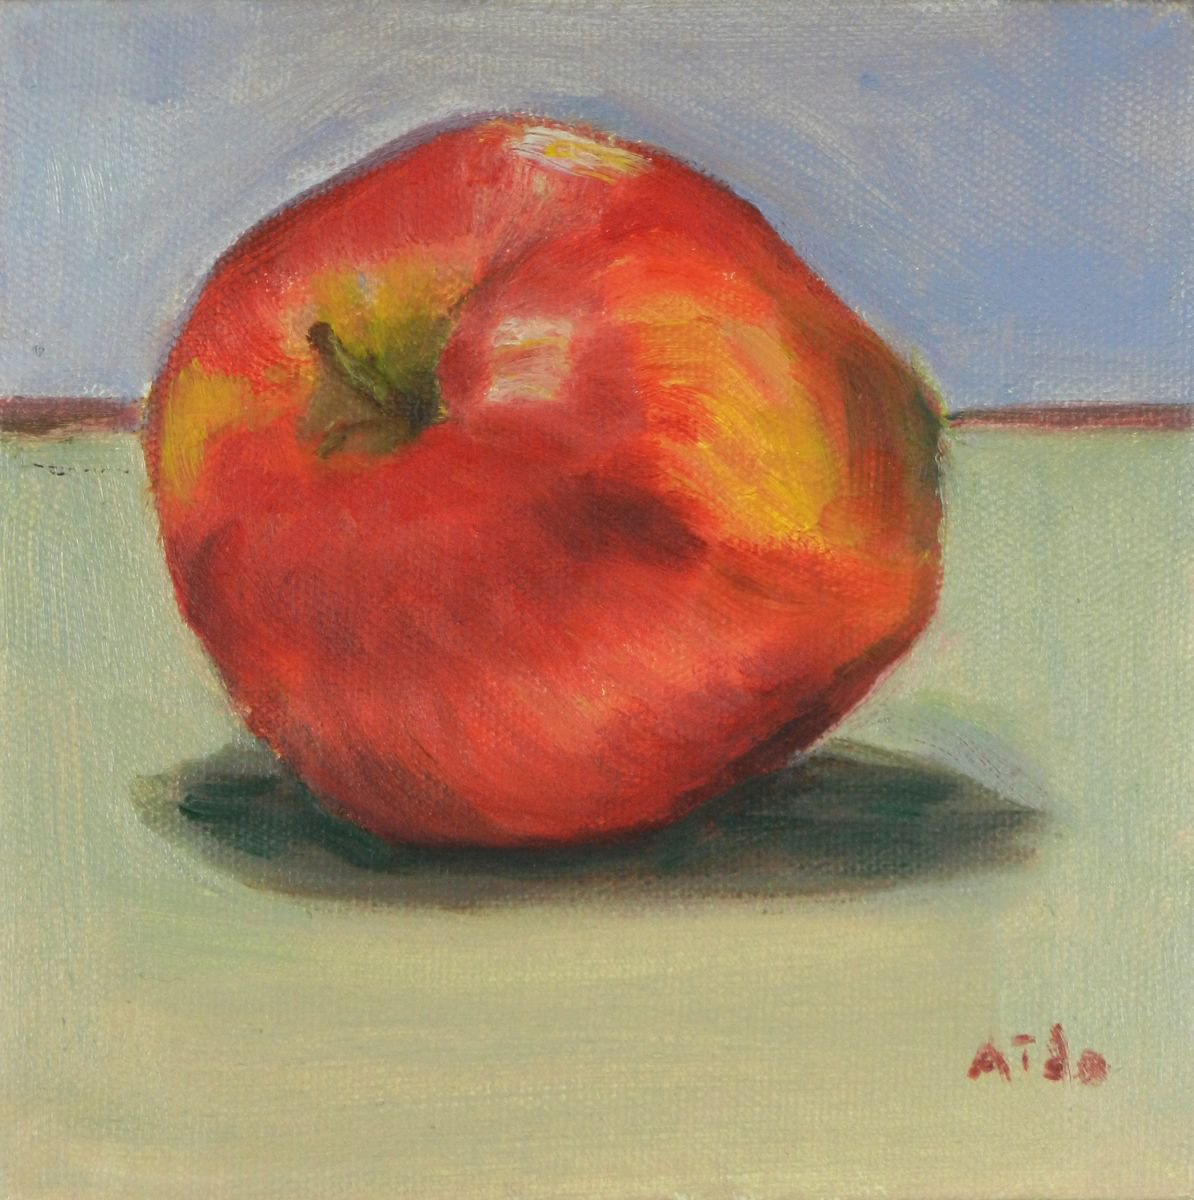 Red Apple -4 by Aida Markiw